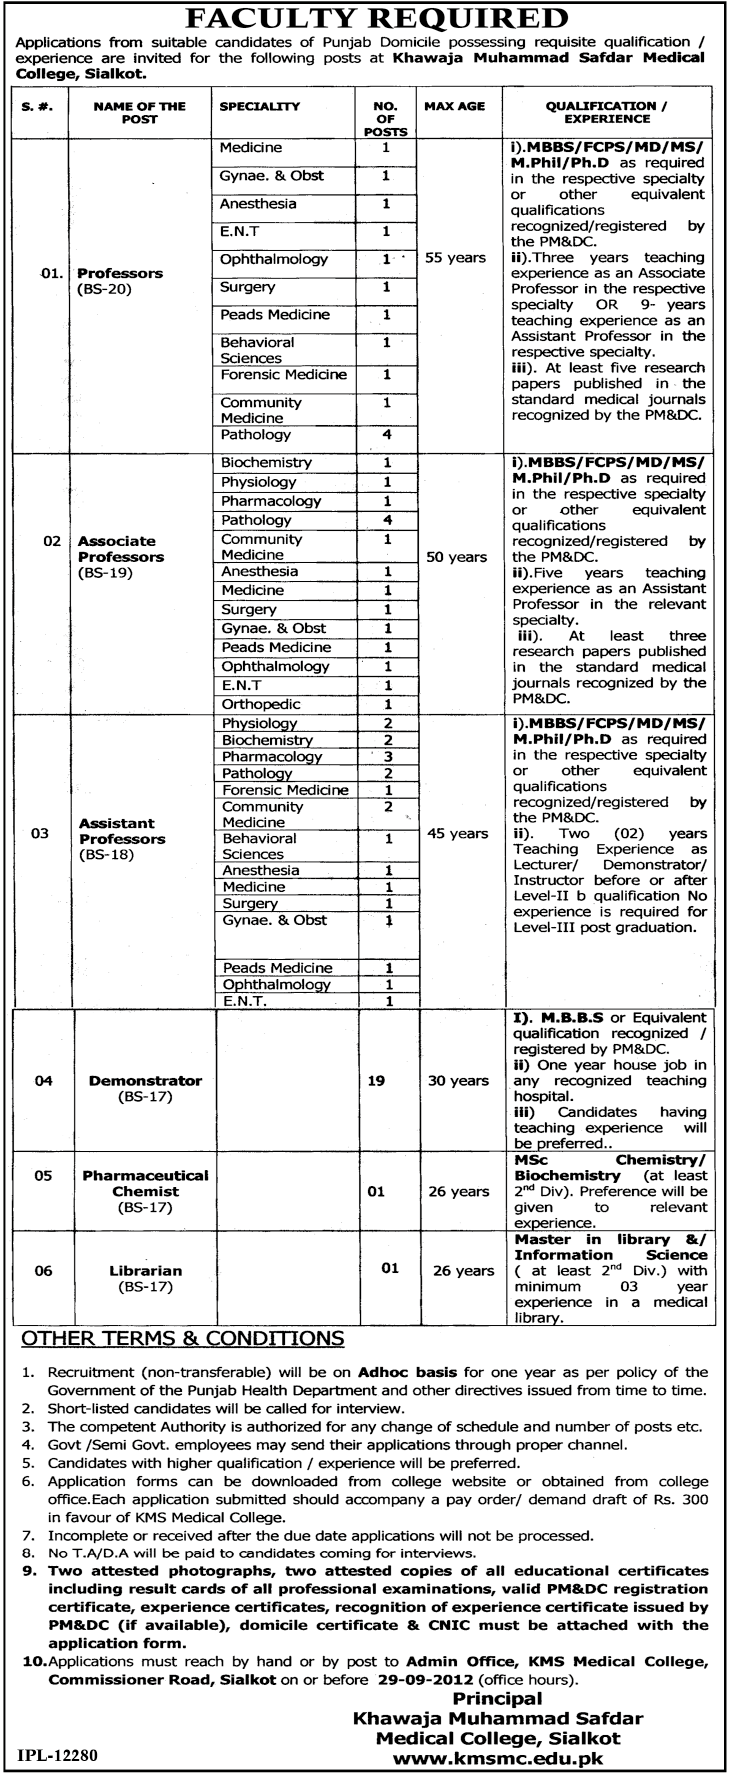 Medical Teaching and Non-Teaching Faculty Required at Khawaja Muhammad Safdar Medical College (Government Job)